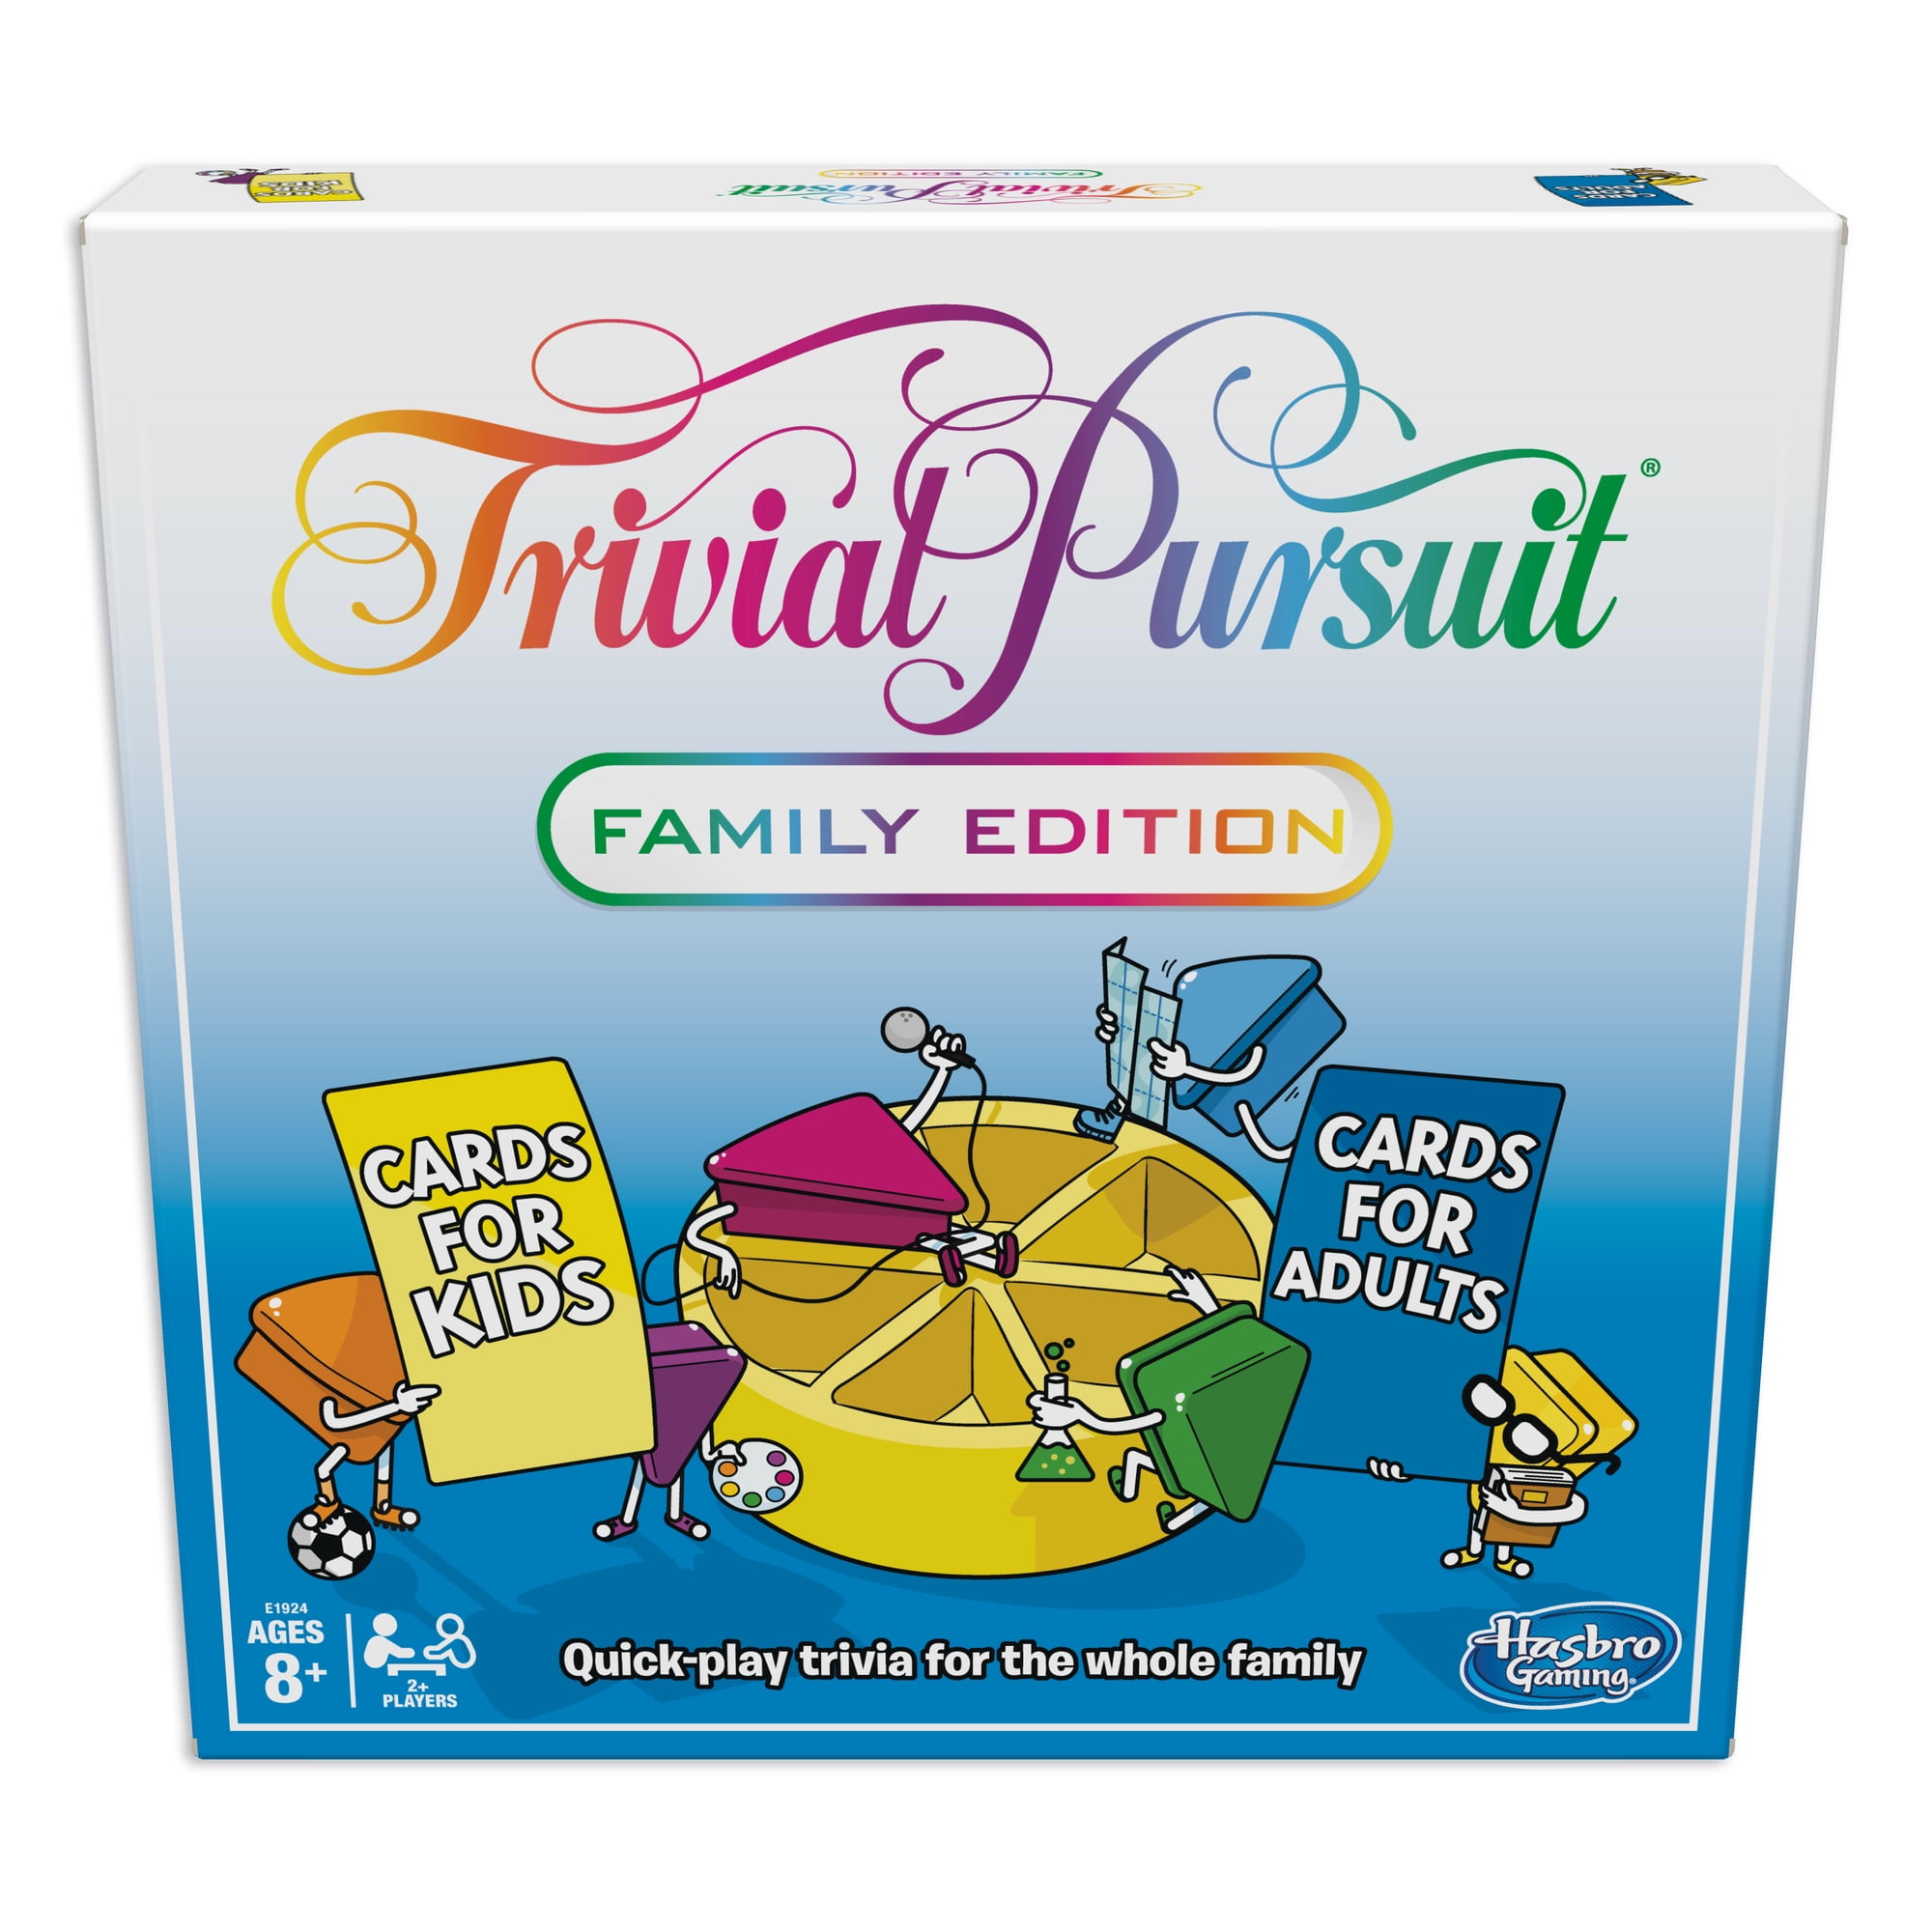 BABY BOOMER EDITION Trivial Pursuit Master Game Card Set 2 Boxes Cards Parts 